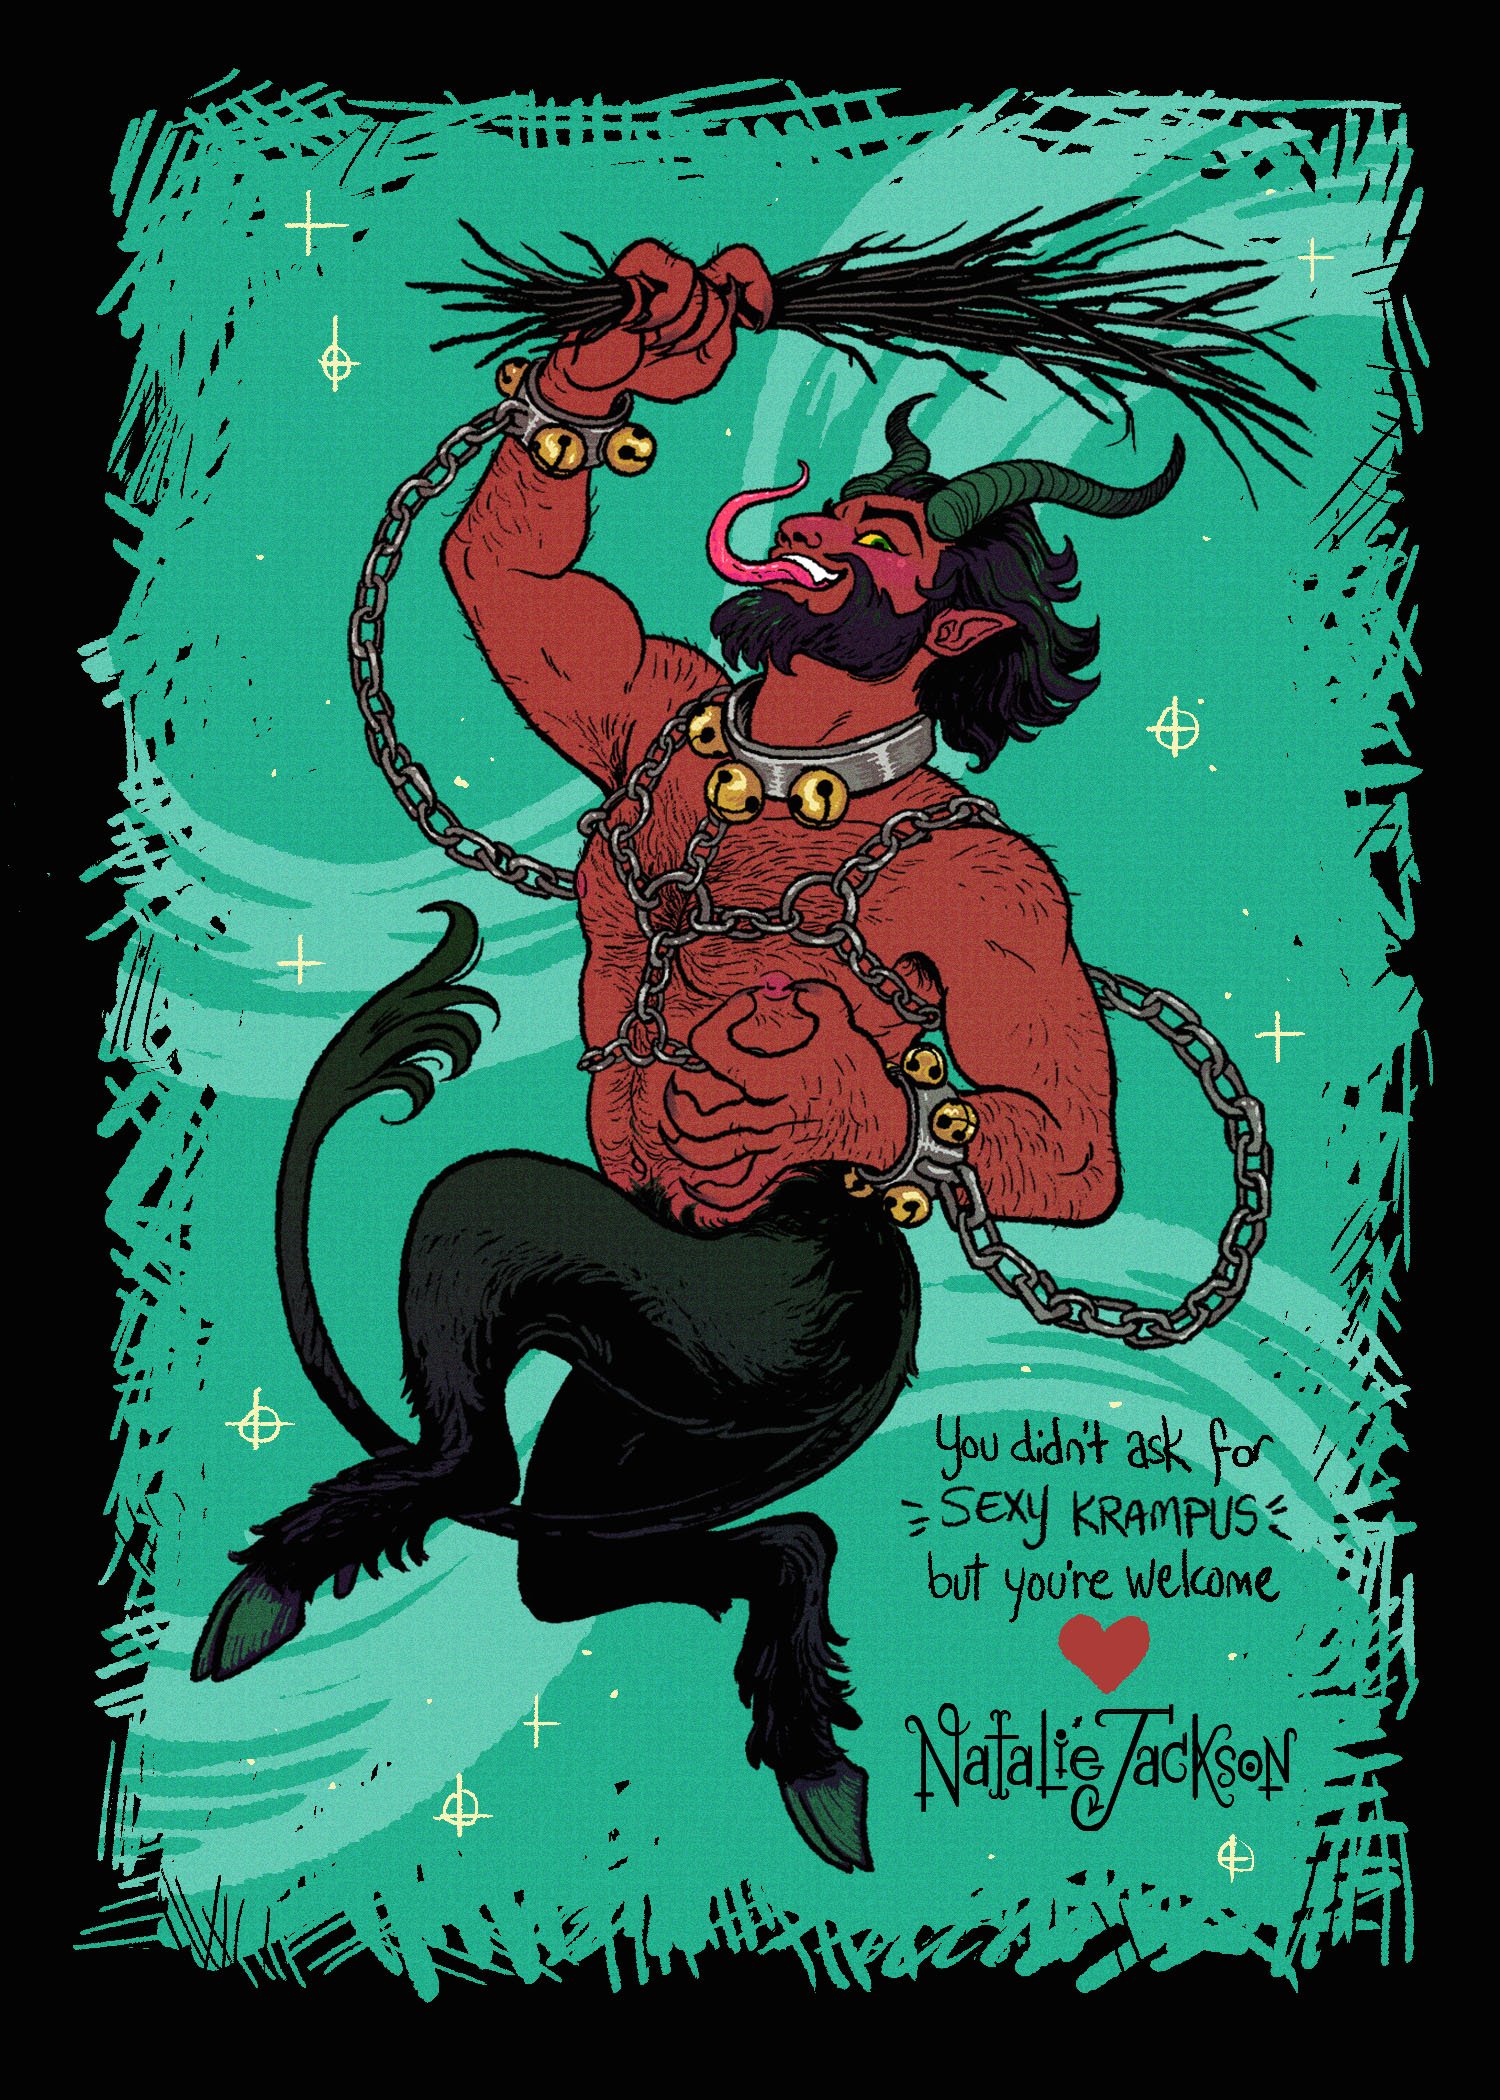 Natalie Jackson Art Twitter: "You didn't know you wanted this #sexykrampus #krampus #xxxmas #christmas #holiday #winter #devil #goatman #hunk #babe #chains #kink #cute #NIPPLE #horns #furry #sexy #chesthair #hairy #hooves #